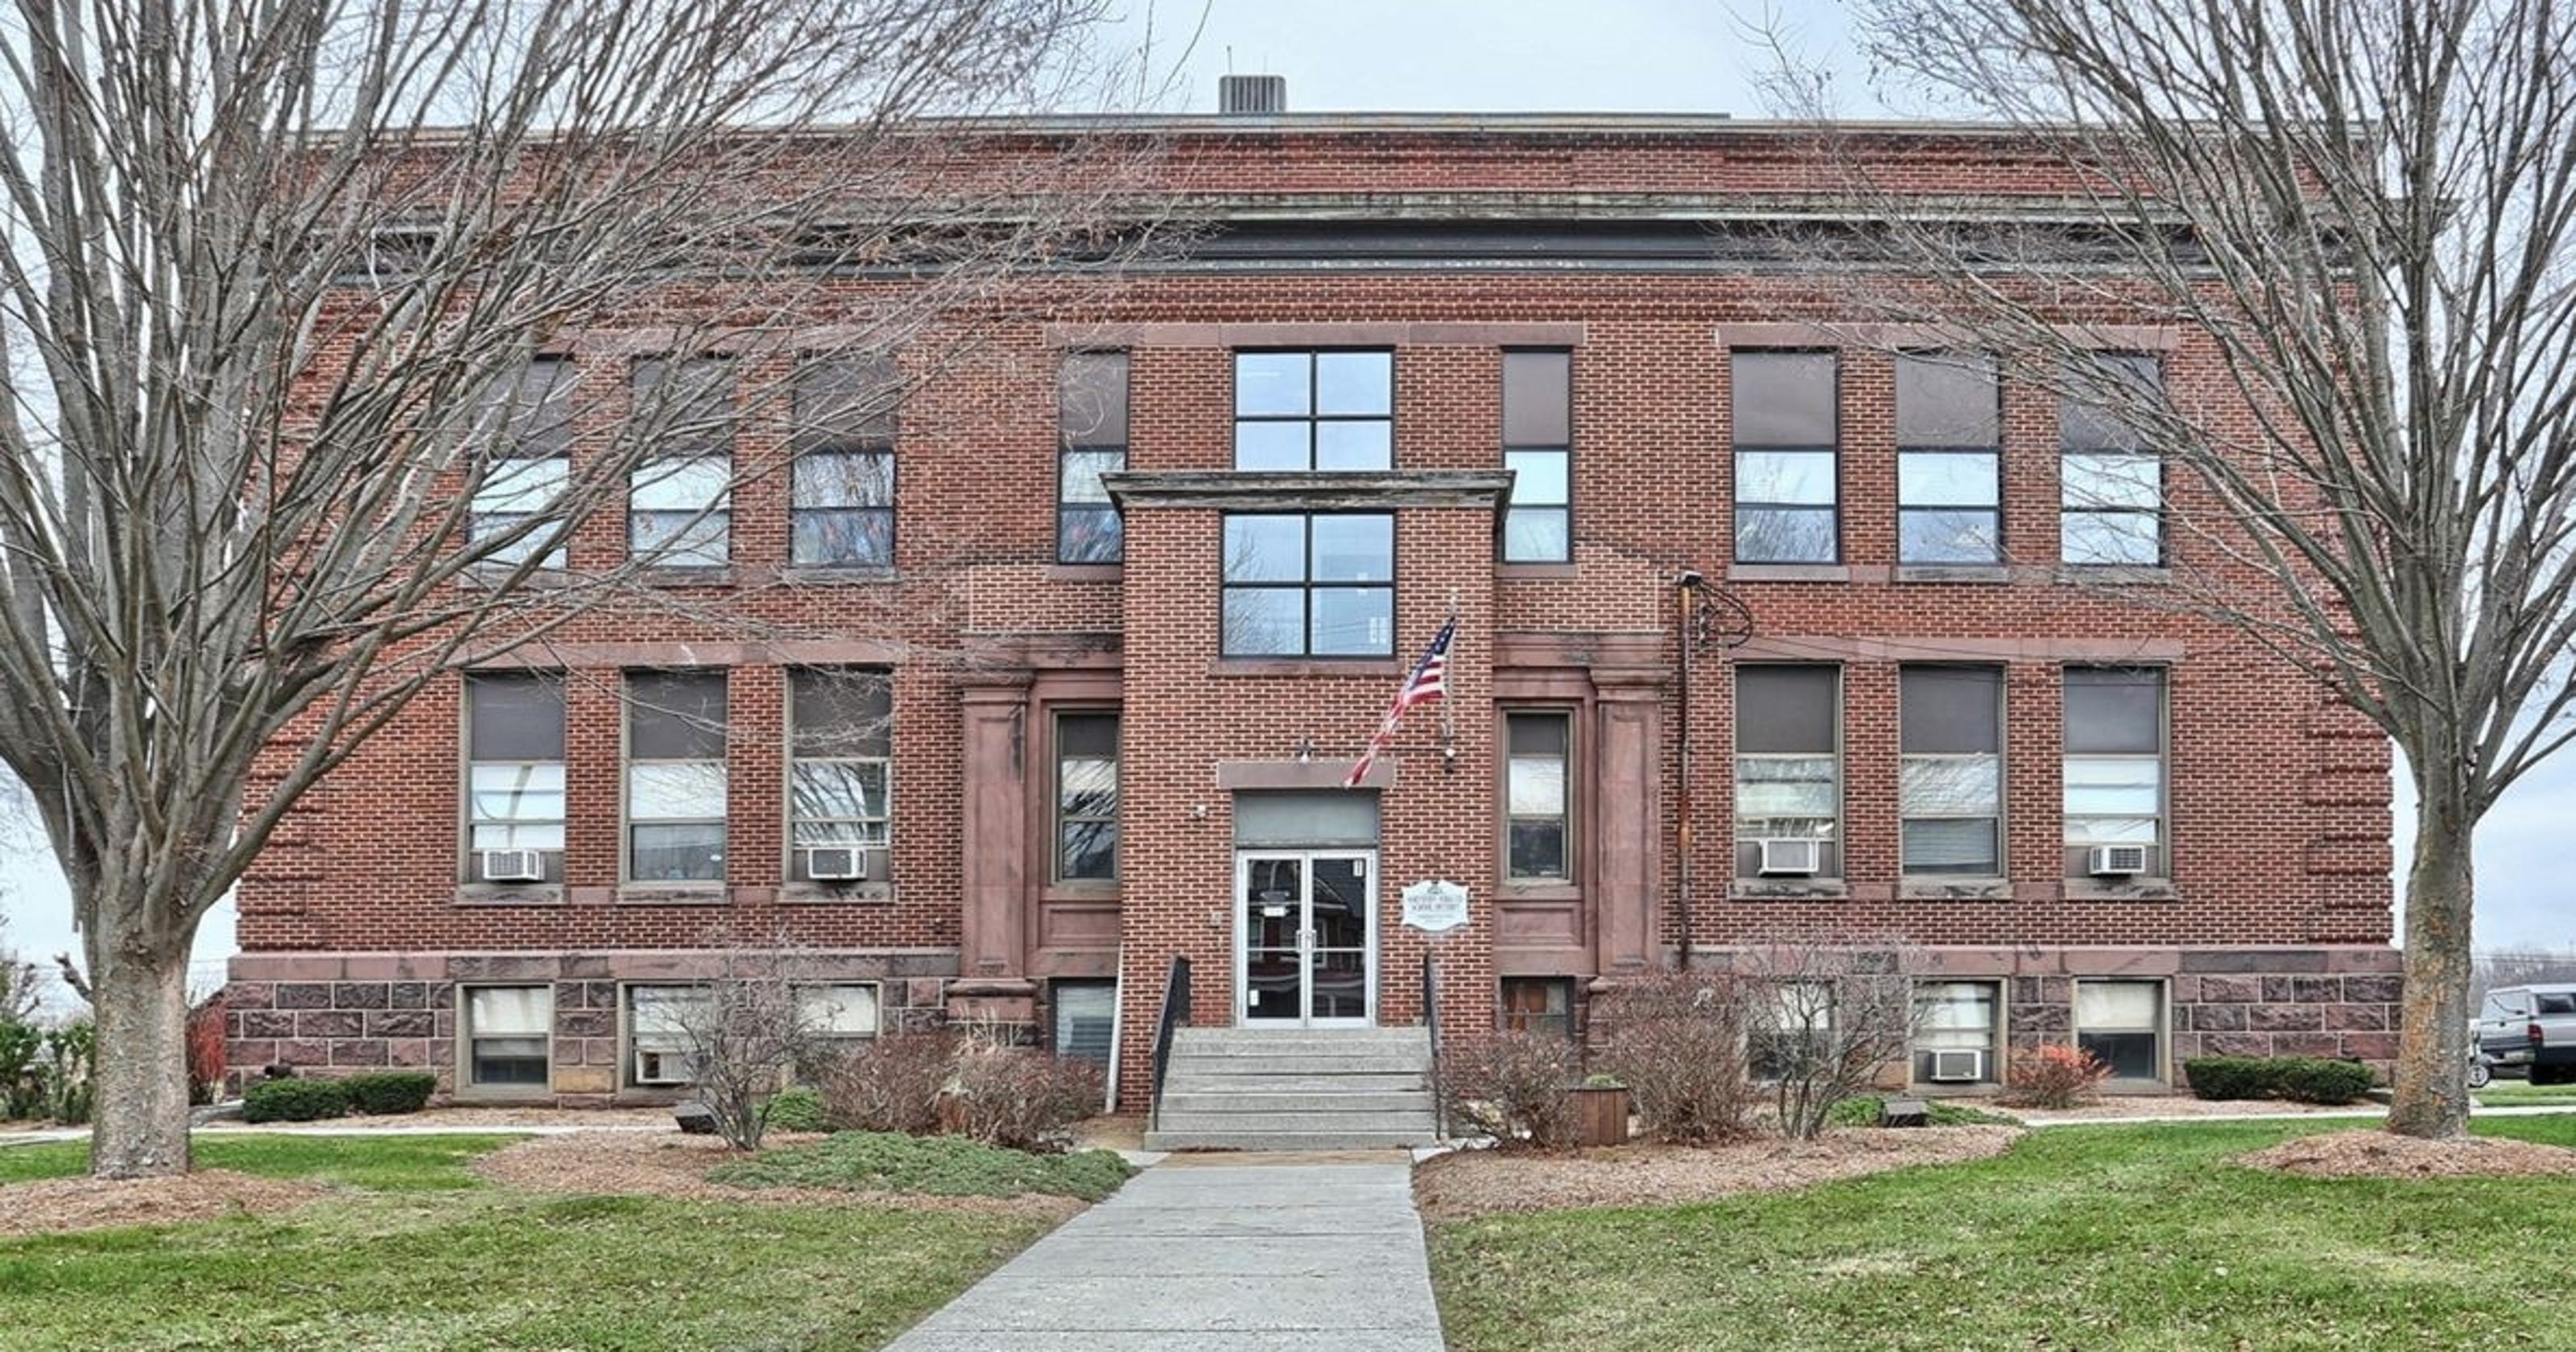 northern-york-school-district-to-sell-historic-building